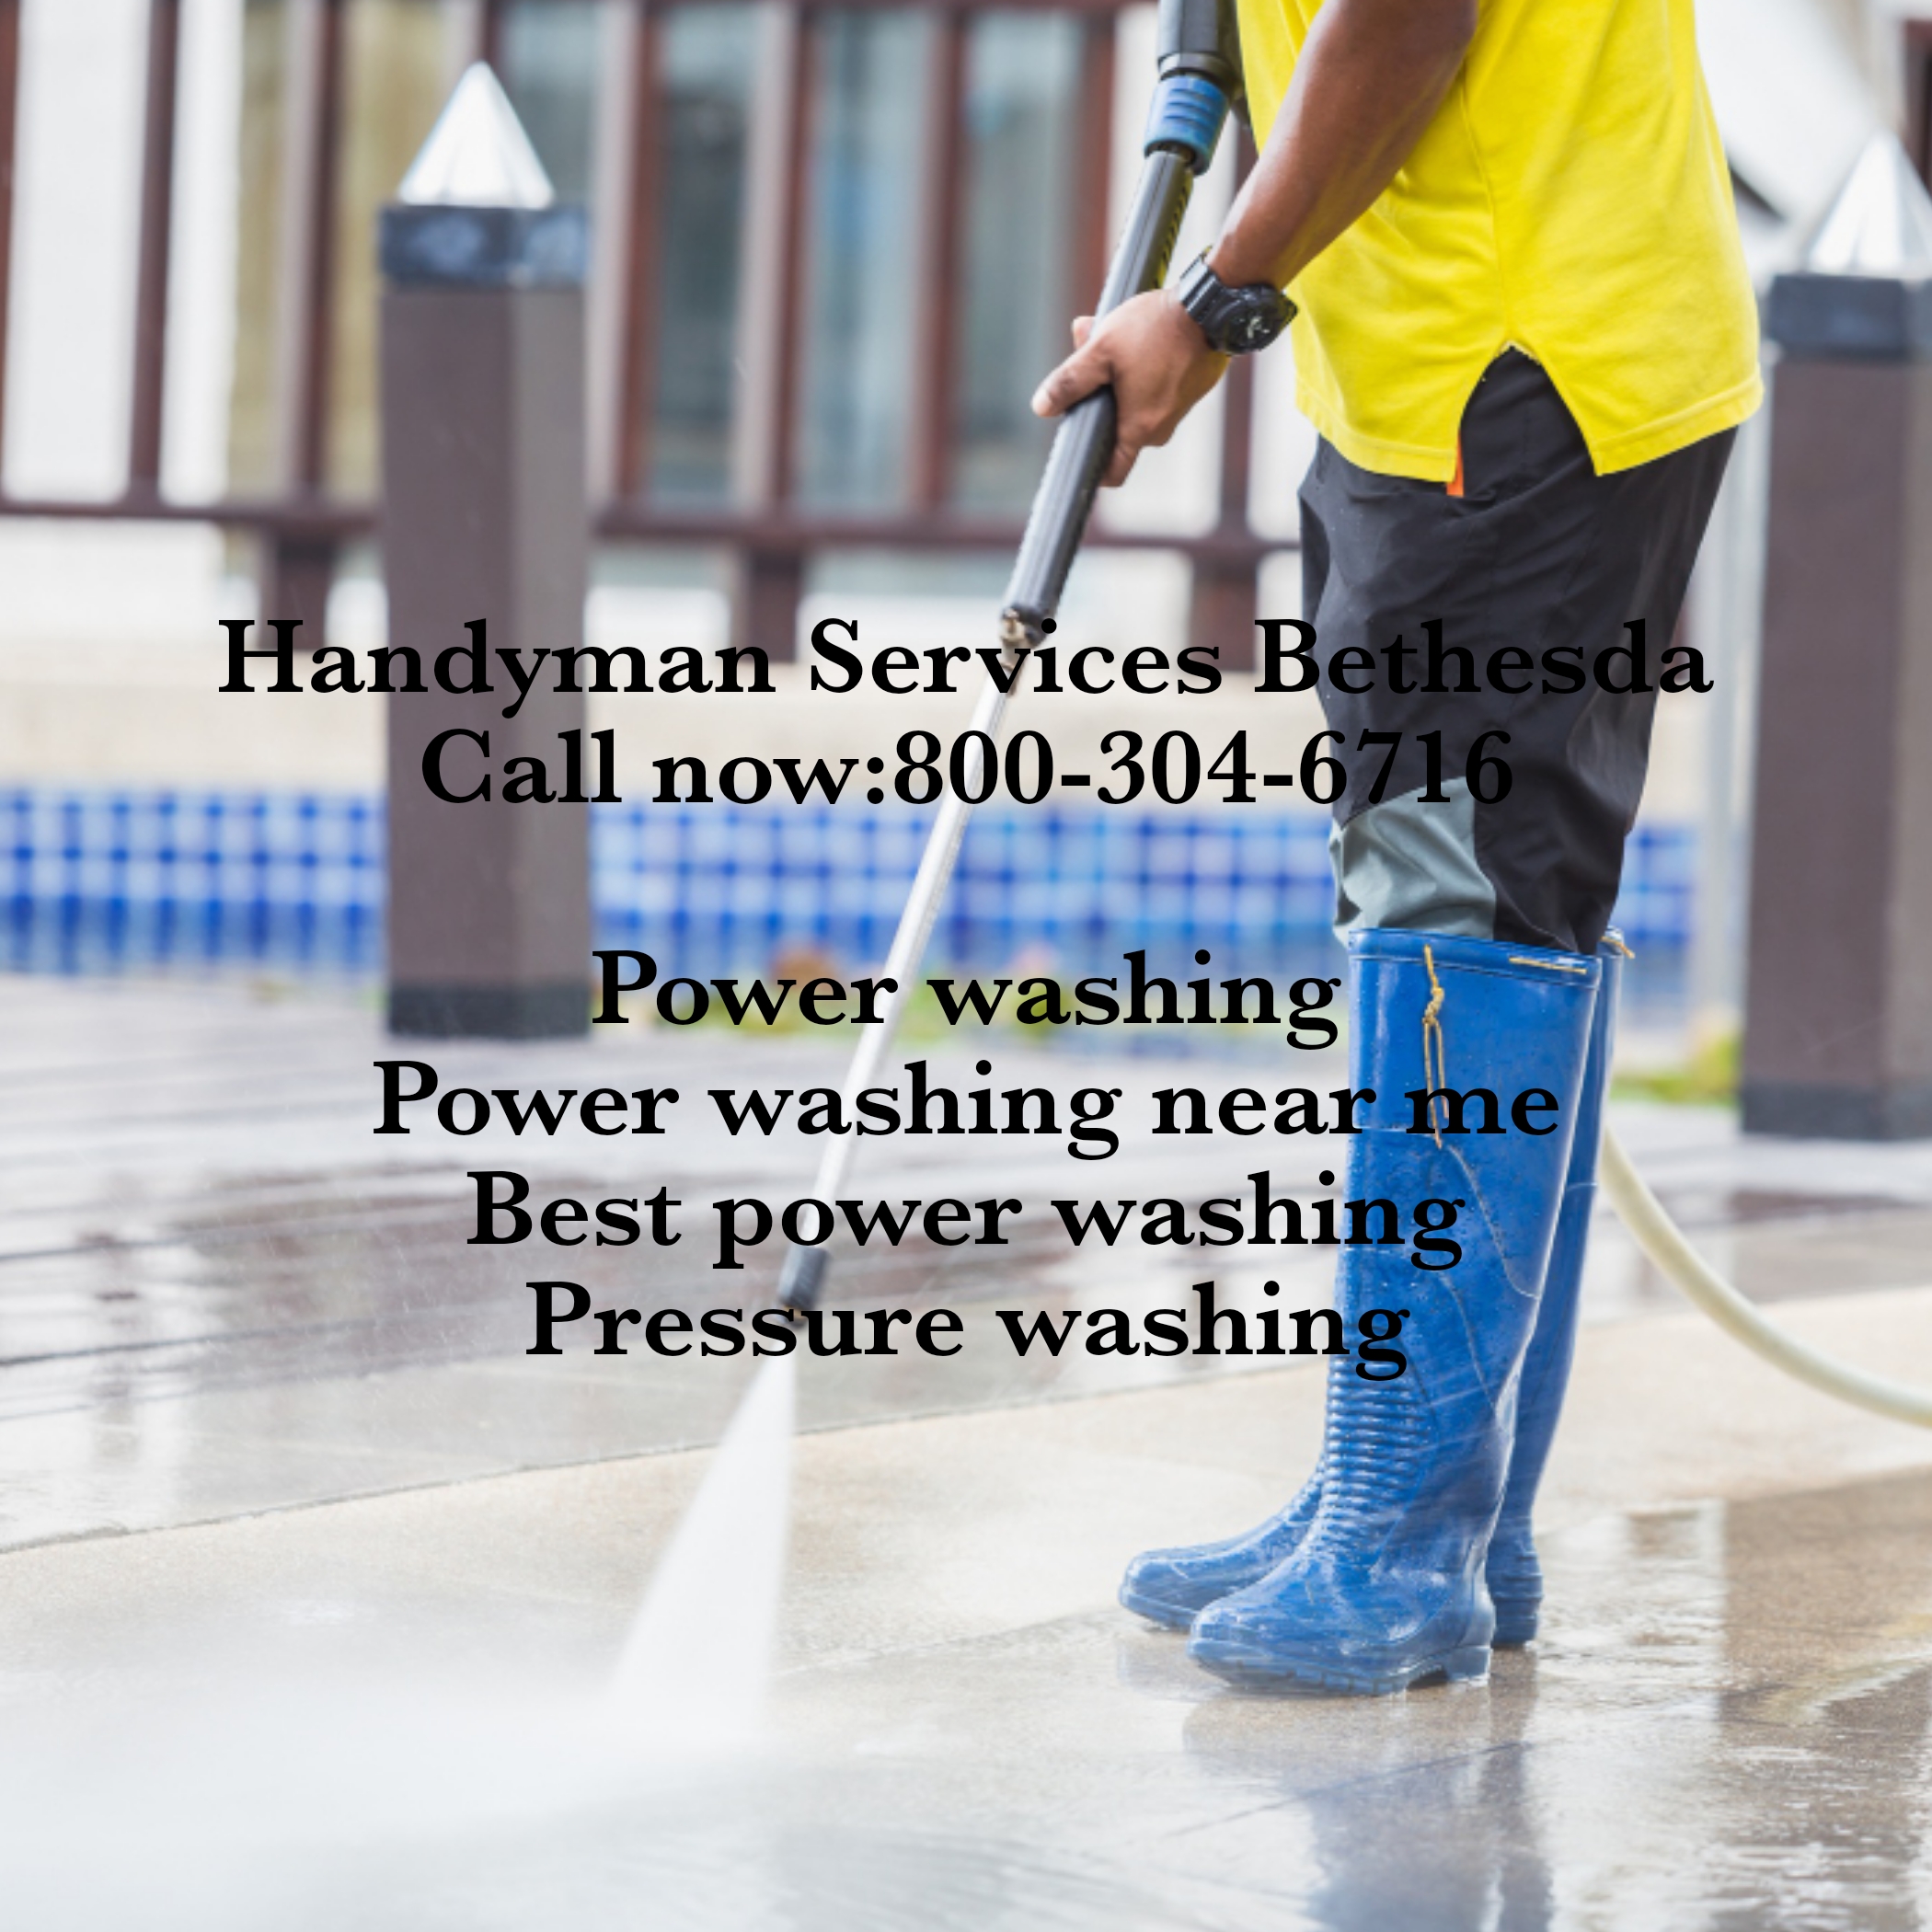 Why power wash your home before paint?